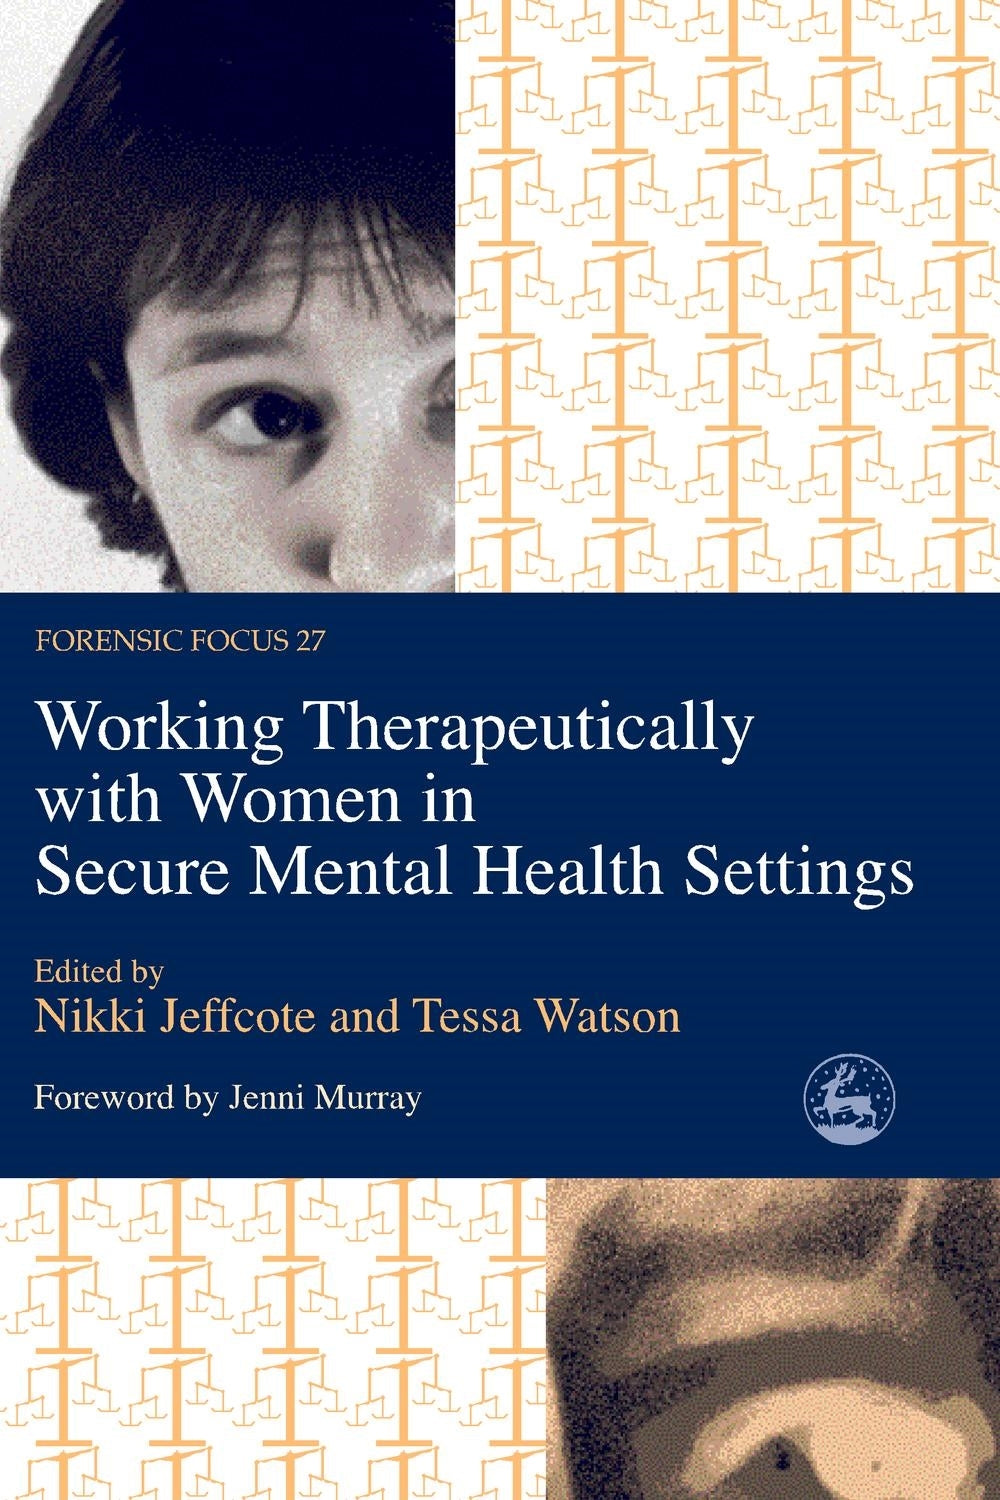 Working Therapeutically with Women in Secure Mental Health Settings by Nikki Jeffcote, Tessa Watson